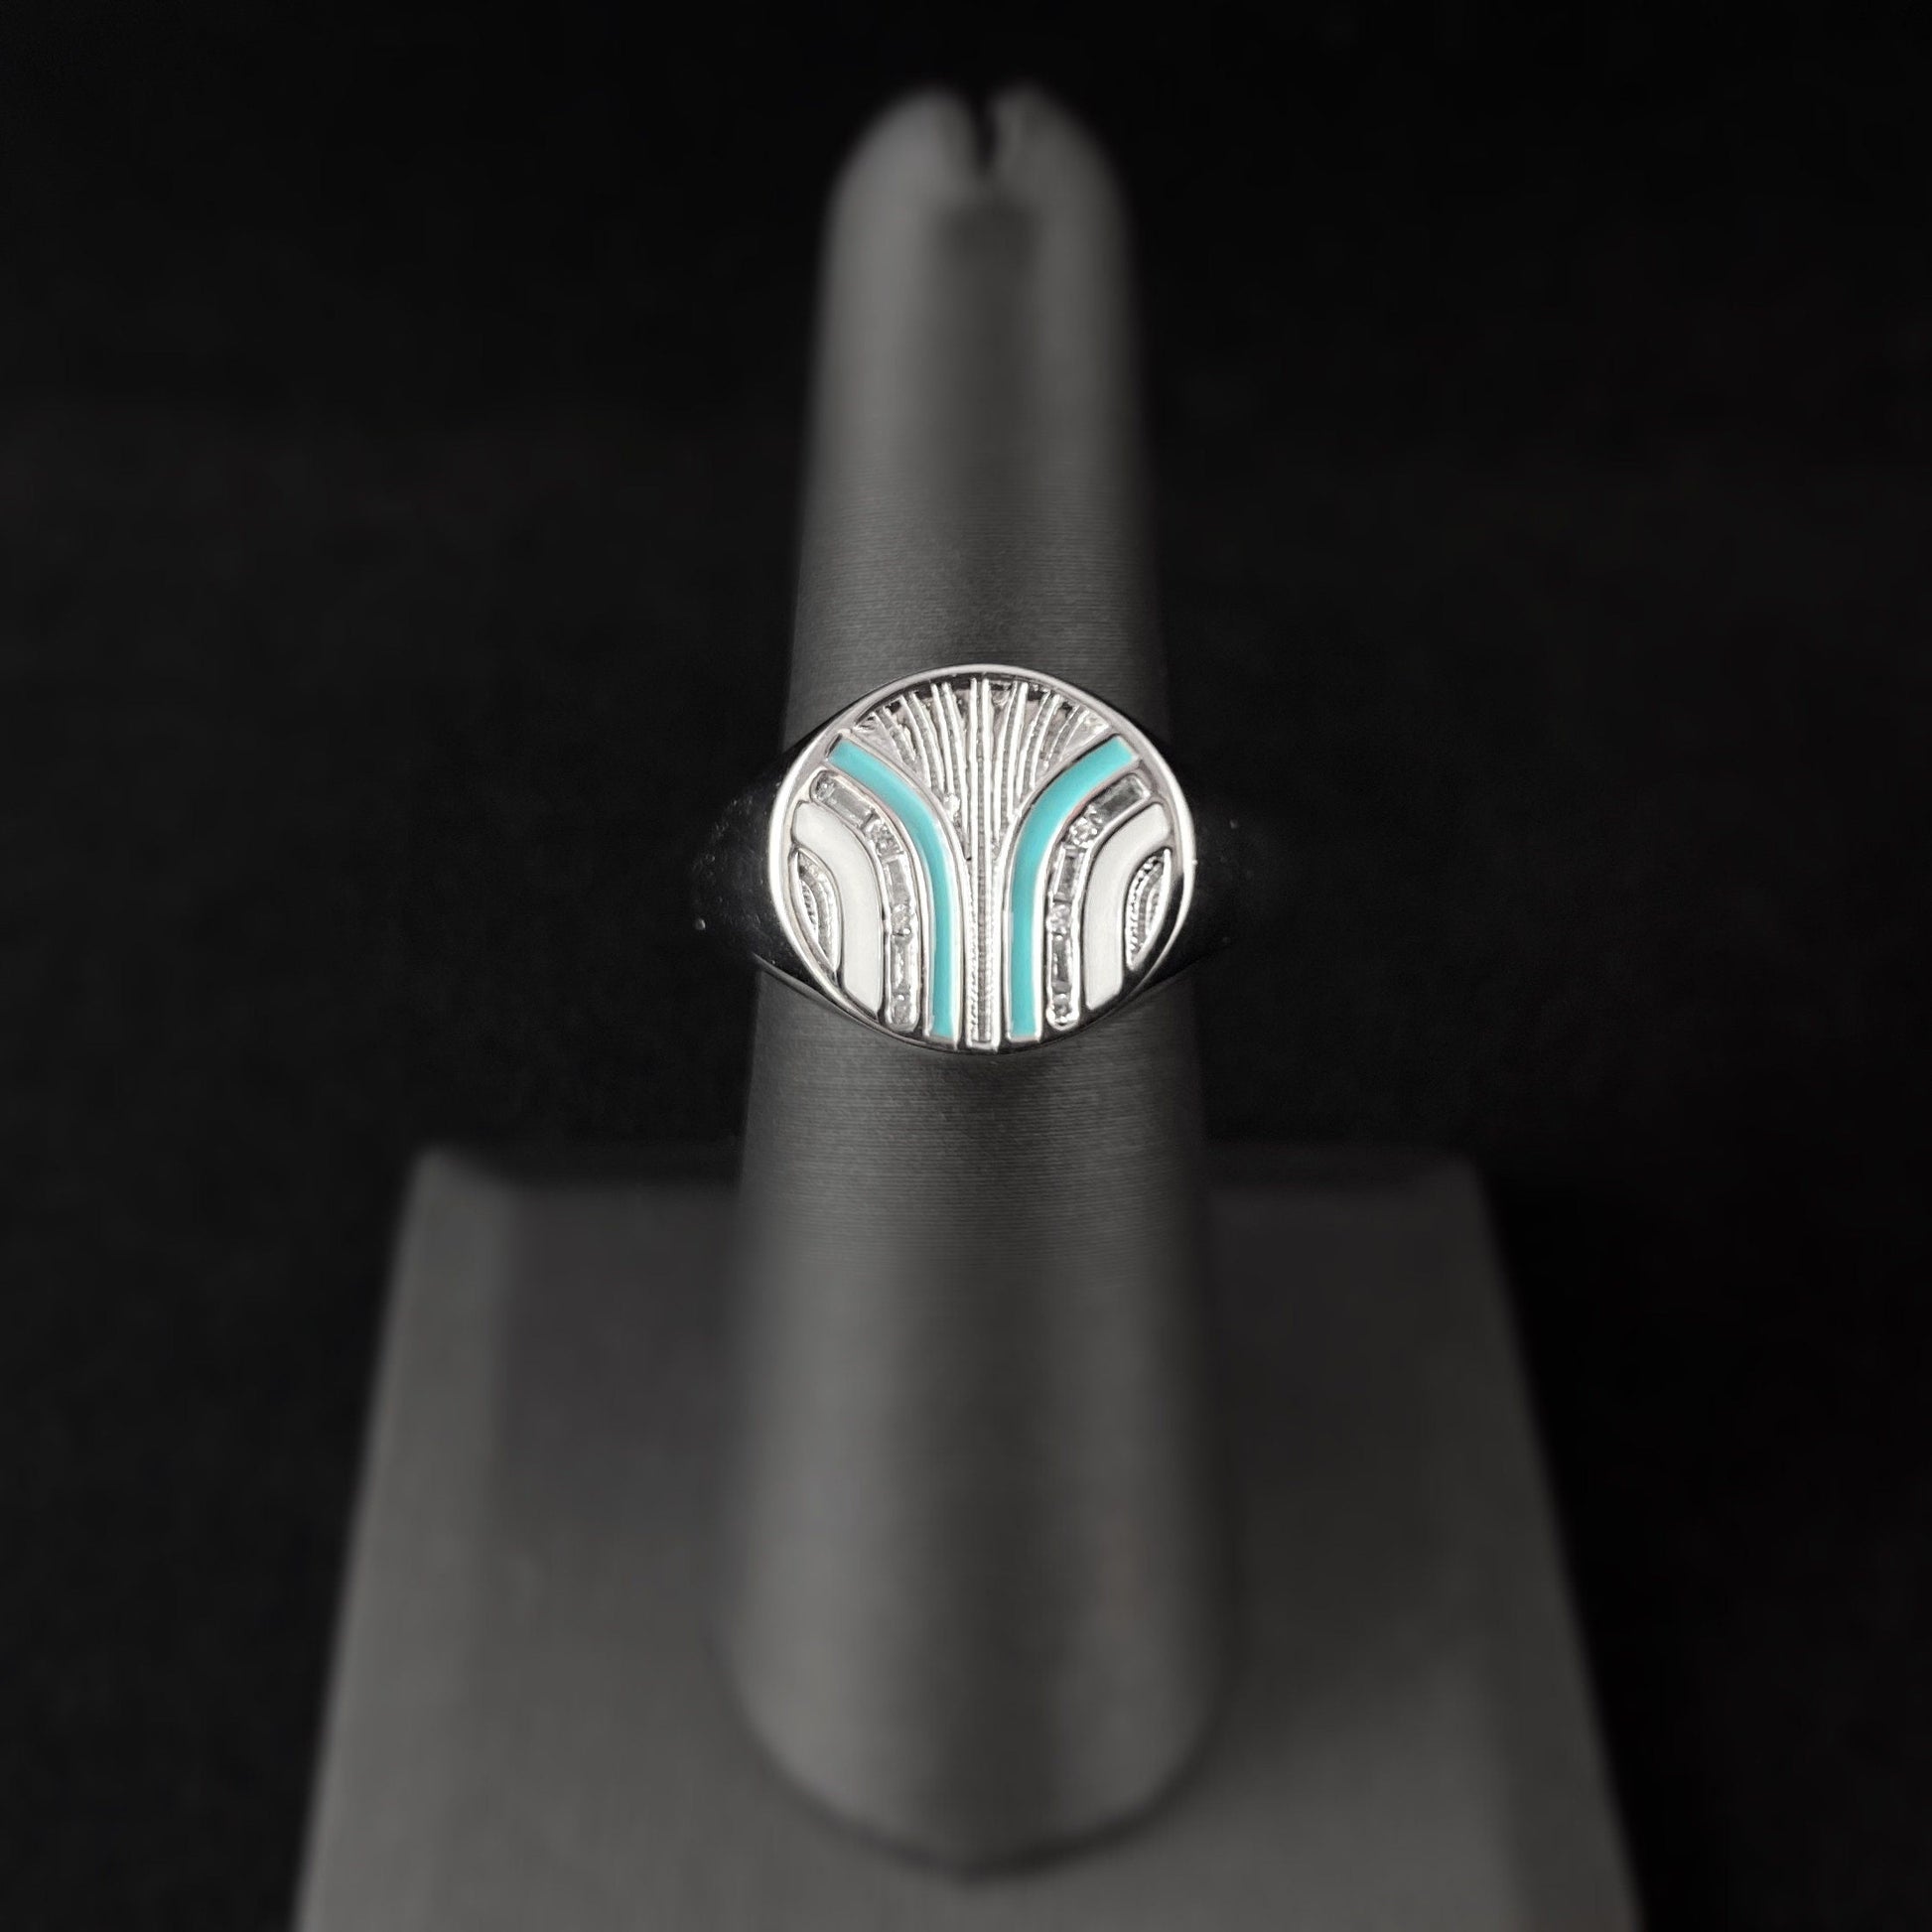 1920s Art Deco Style Silver Signet Ring with Turquoise and White Banded Lines - South Beach, Size 8